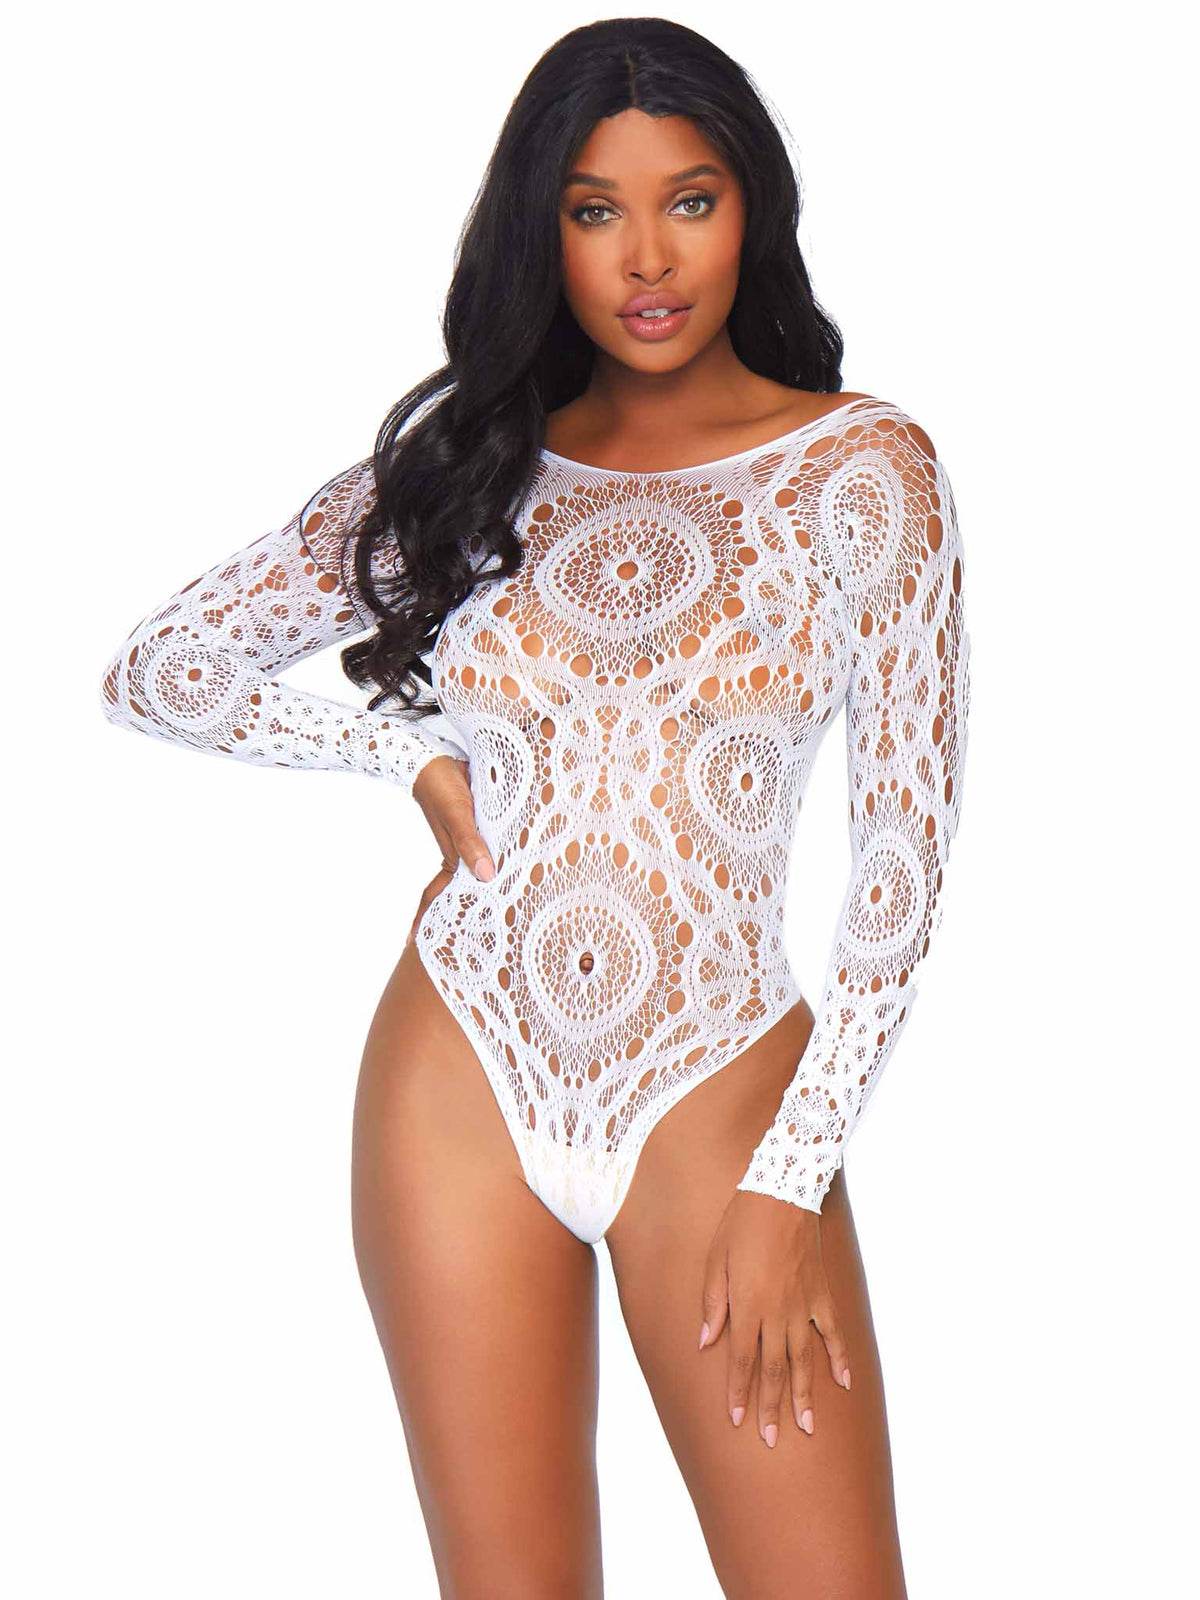 Crochet Lace Long Sleeve Snap Crotch Teddy White - Model Express Vancouver